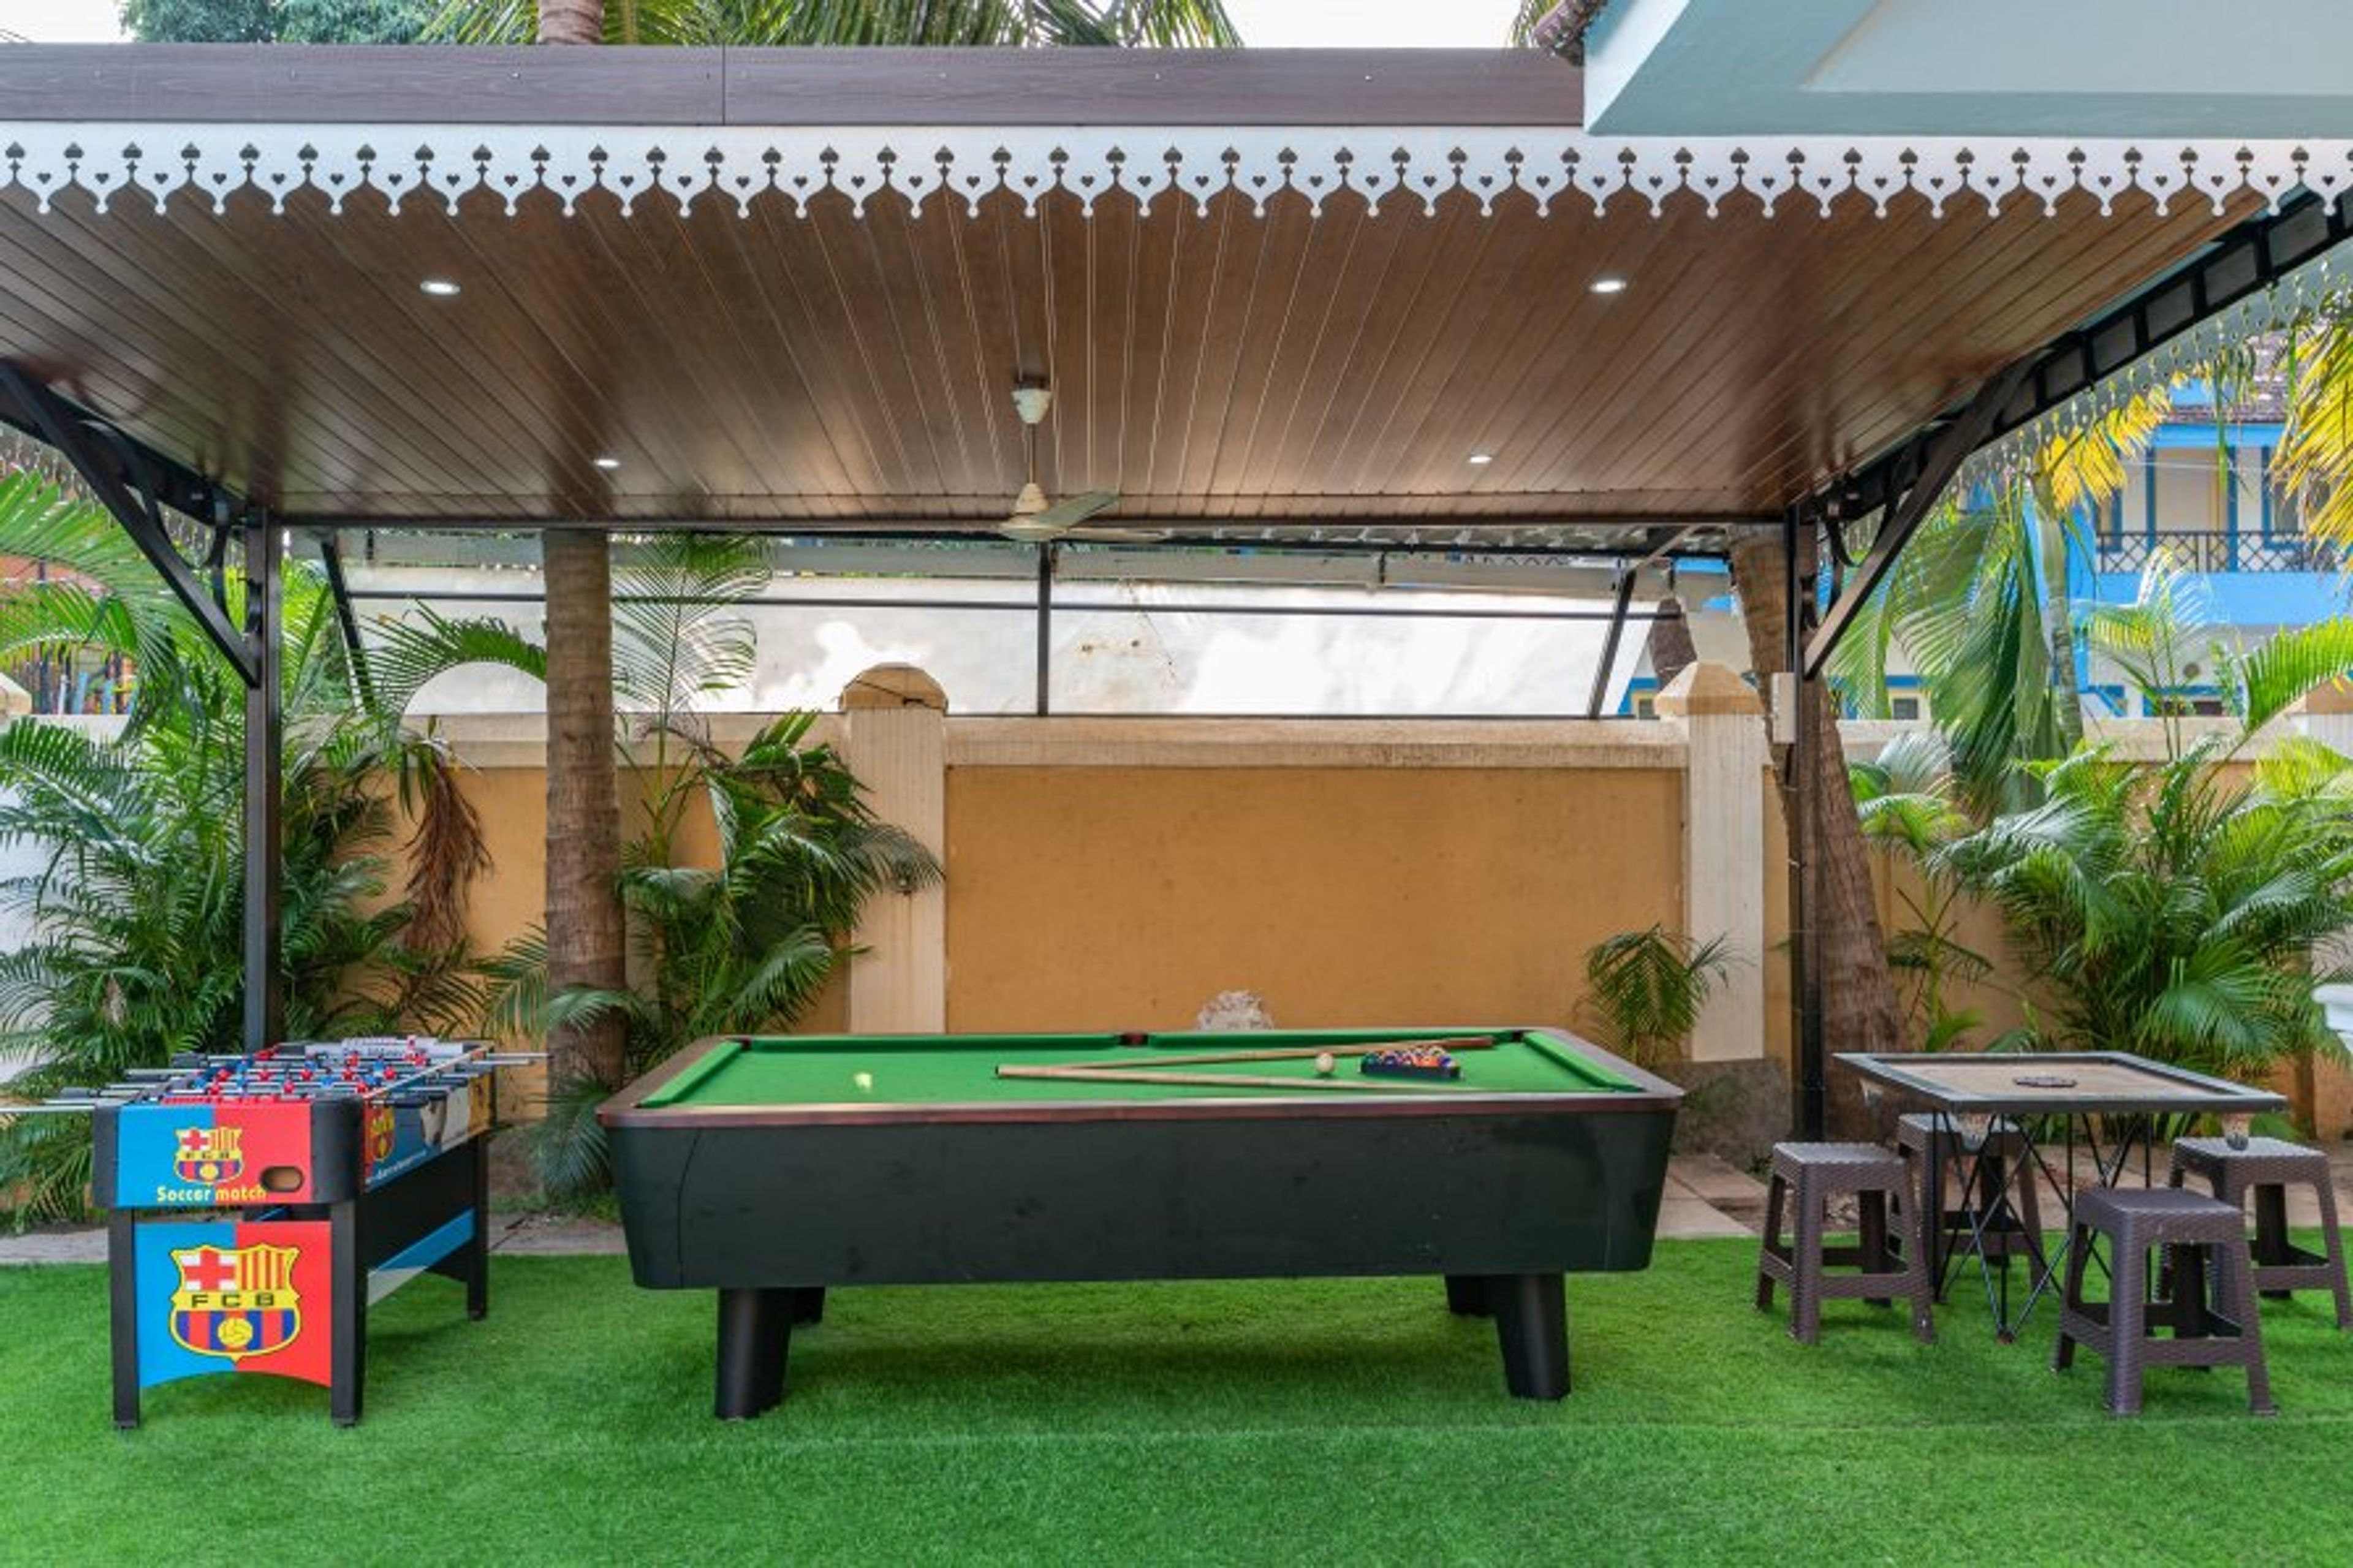 Play area - foosball table, carrom and pool table.